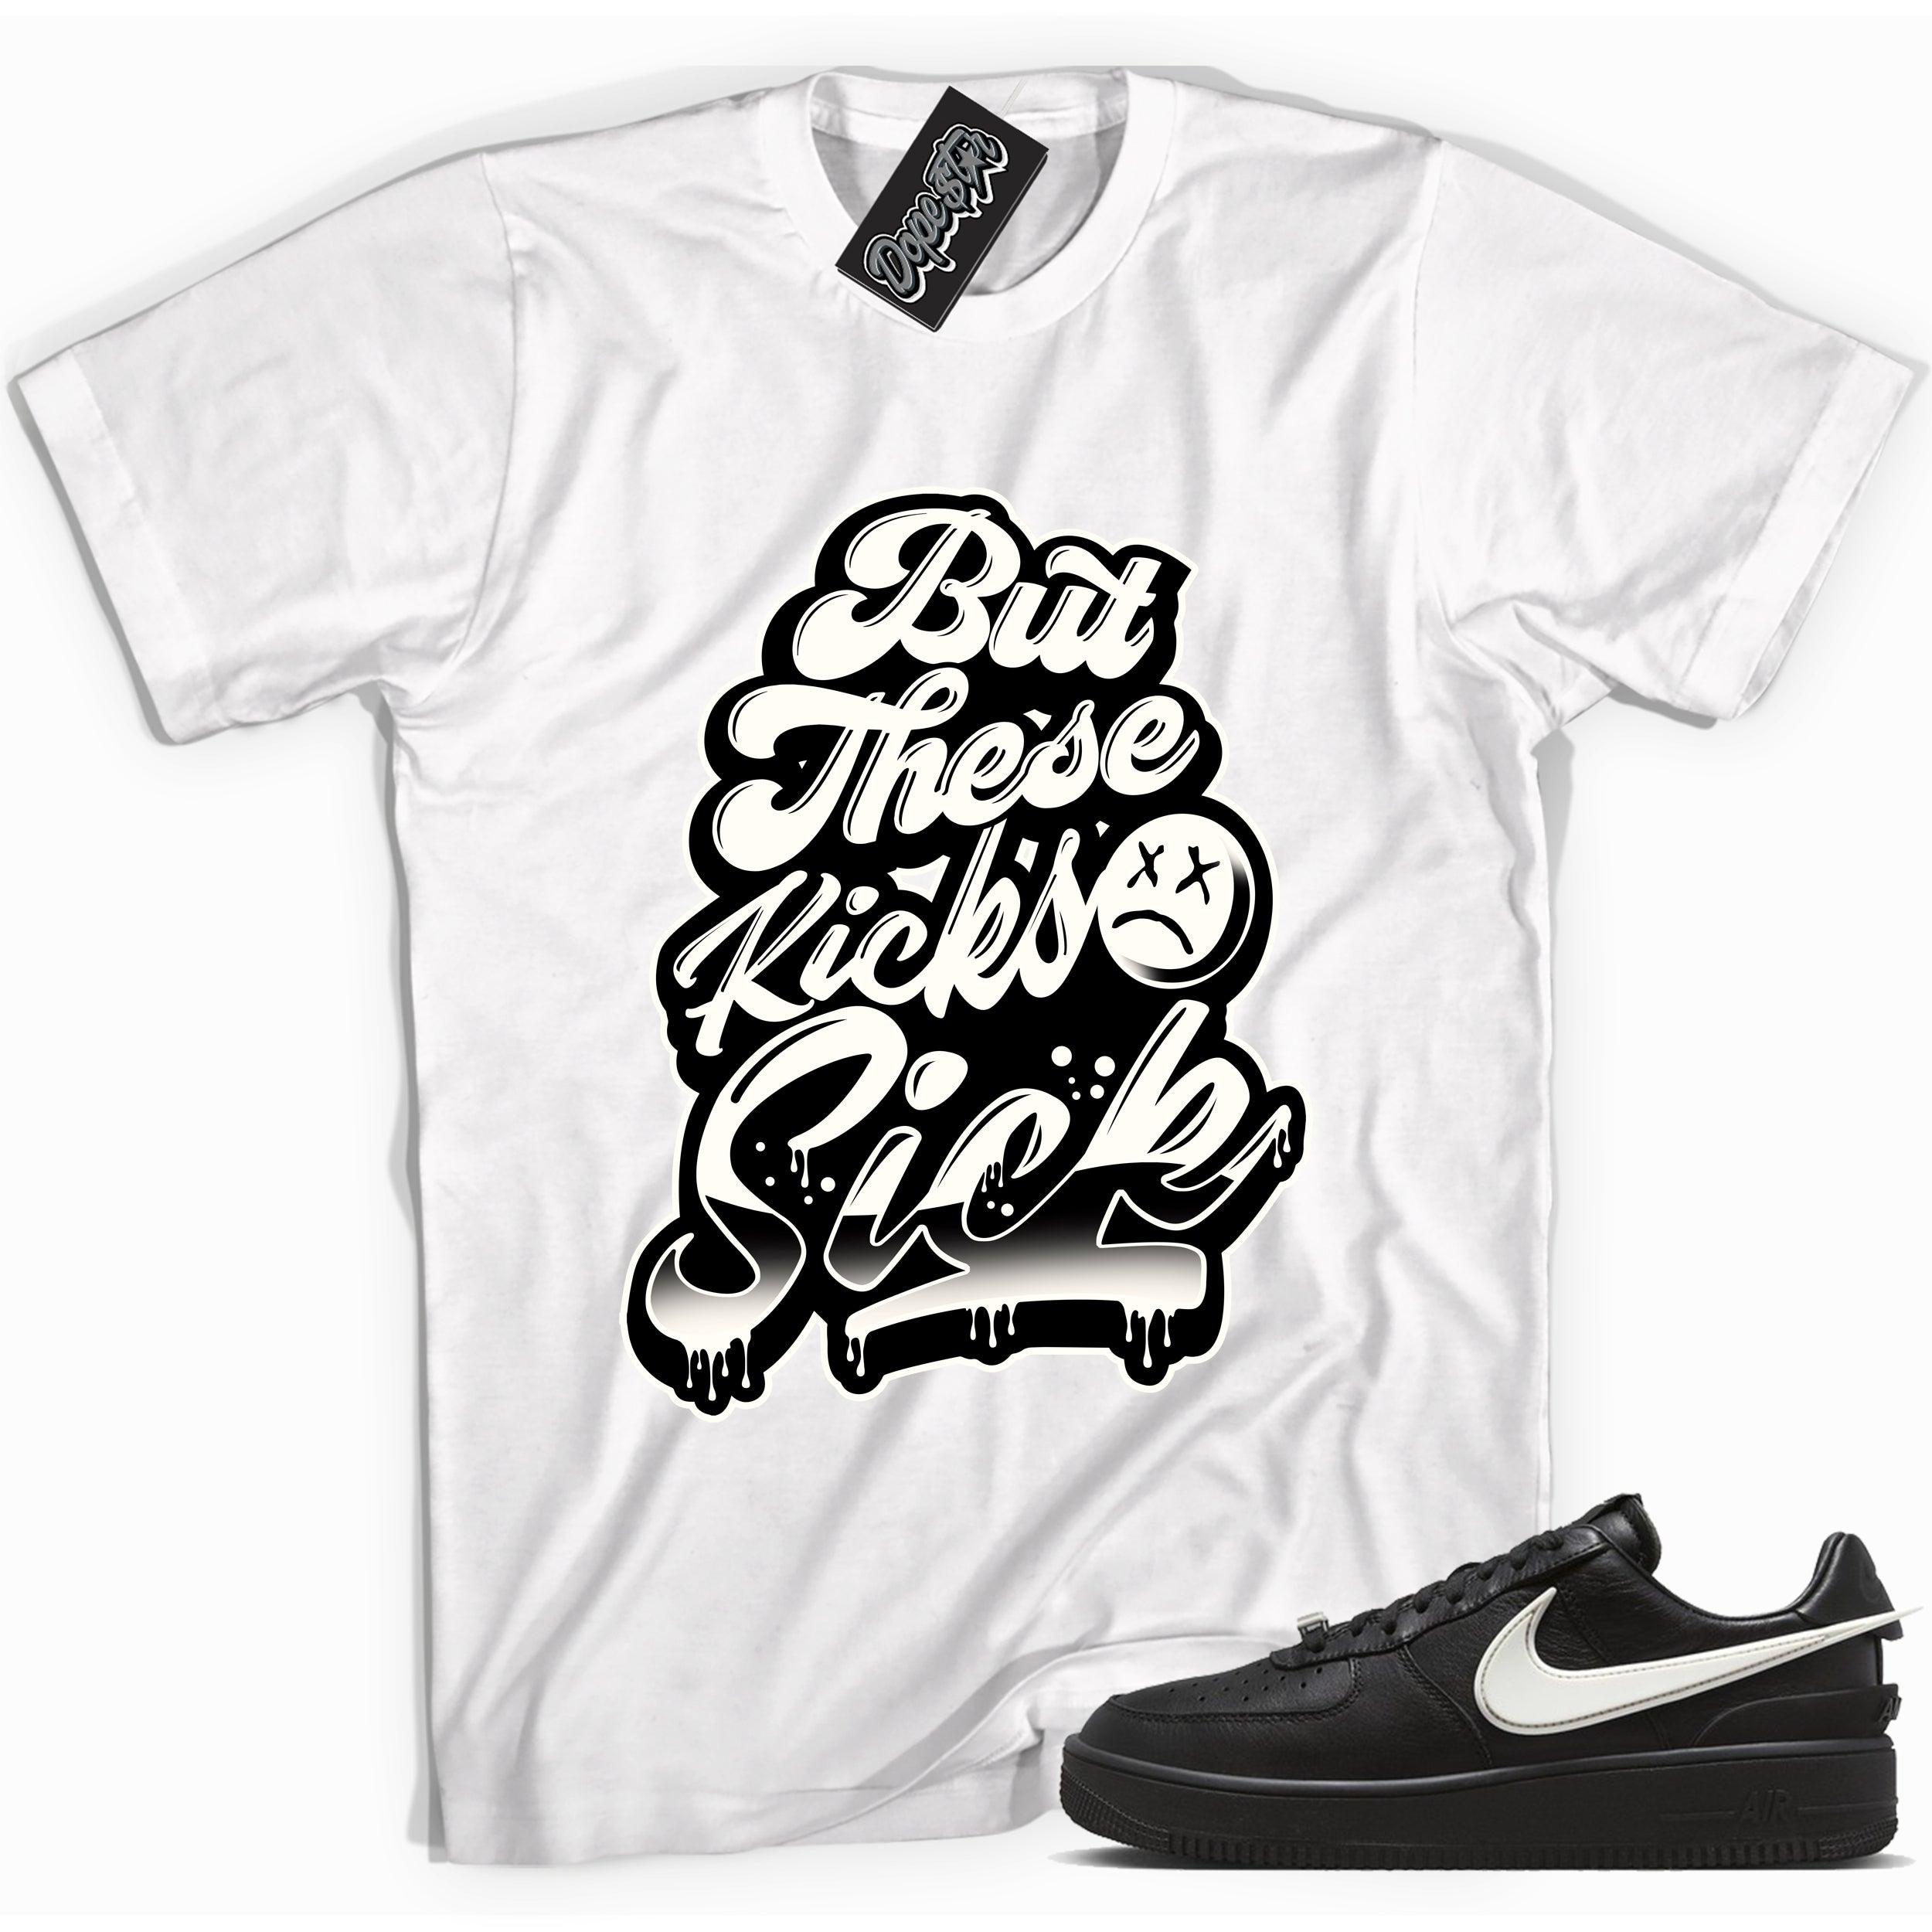 Cool white graphic tee with 'but these kicks sick' print, that perfectly matches Nike Air Force 1 Low SP Ambush Phantom sneakers.